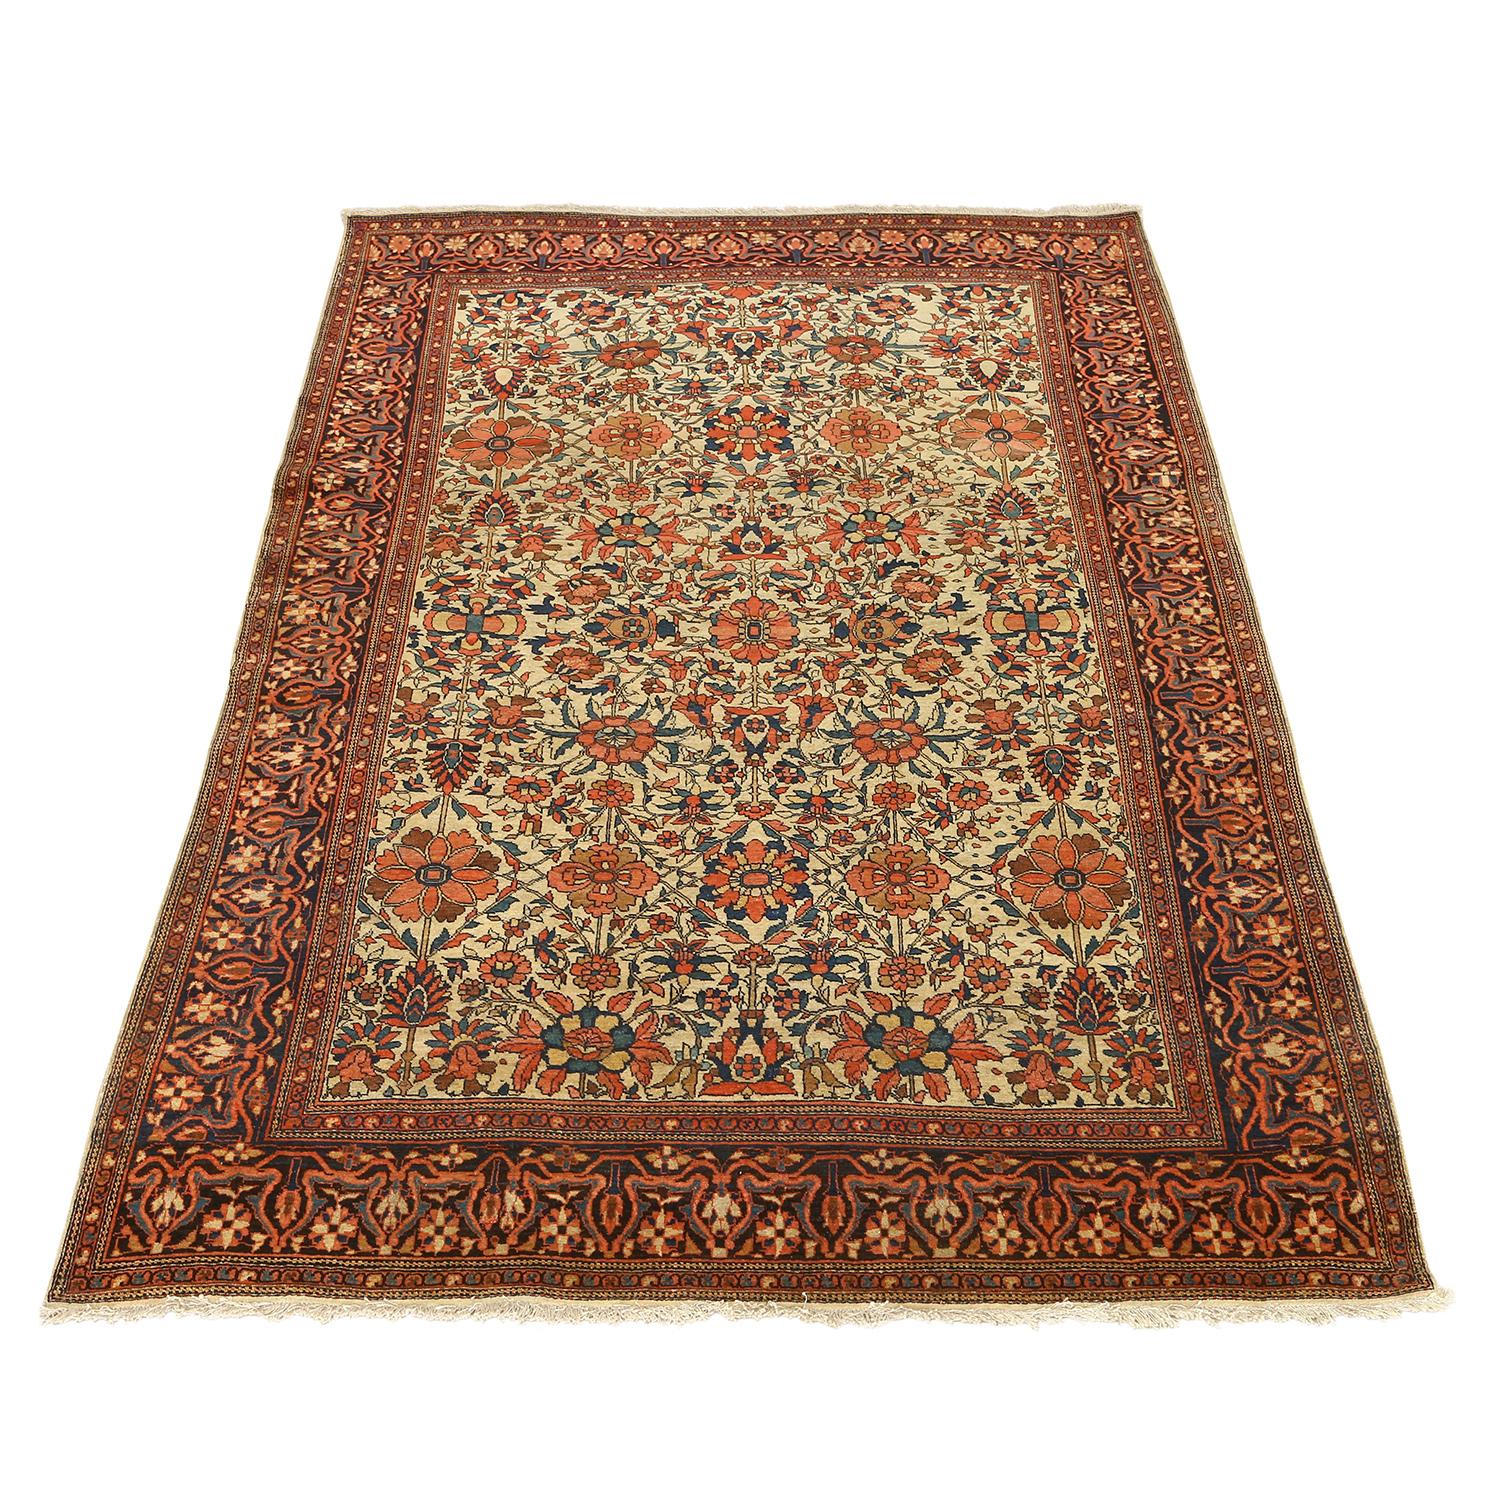 Sarouk Farahan Damoka Collection Antique Persian Farahan - Size: 6 ft 5 in x 4 ft 6 in For Sale